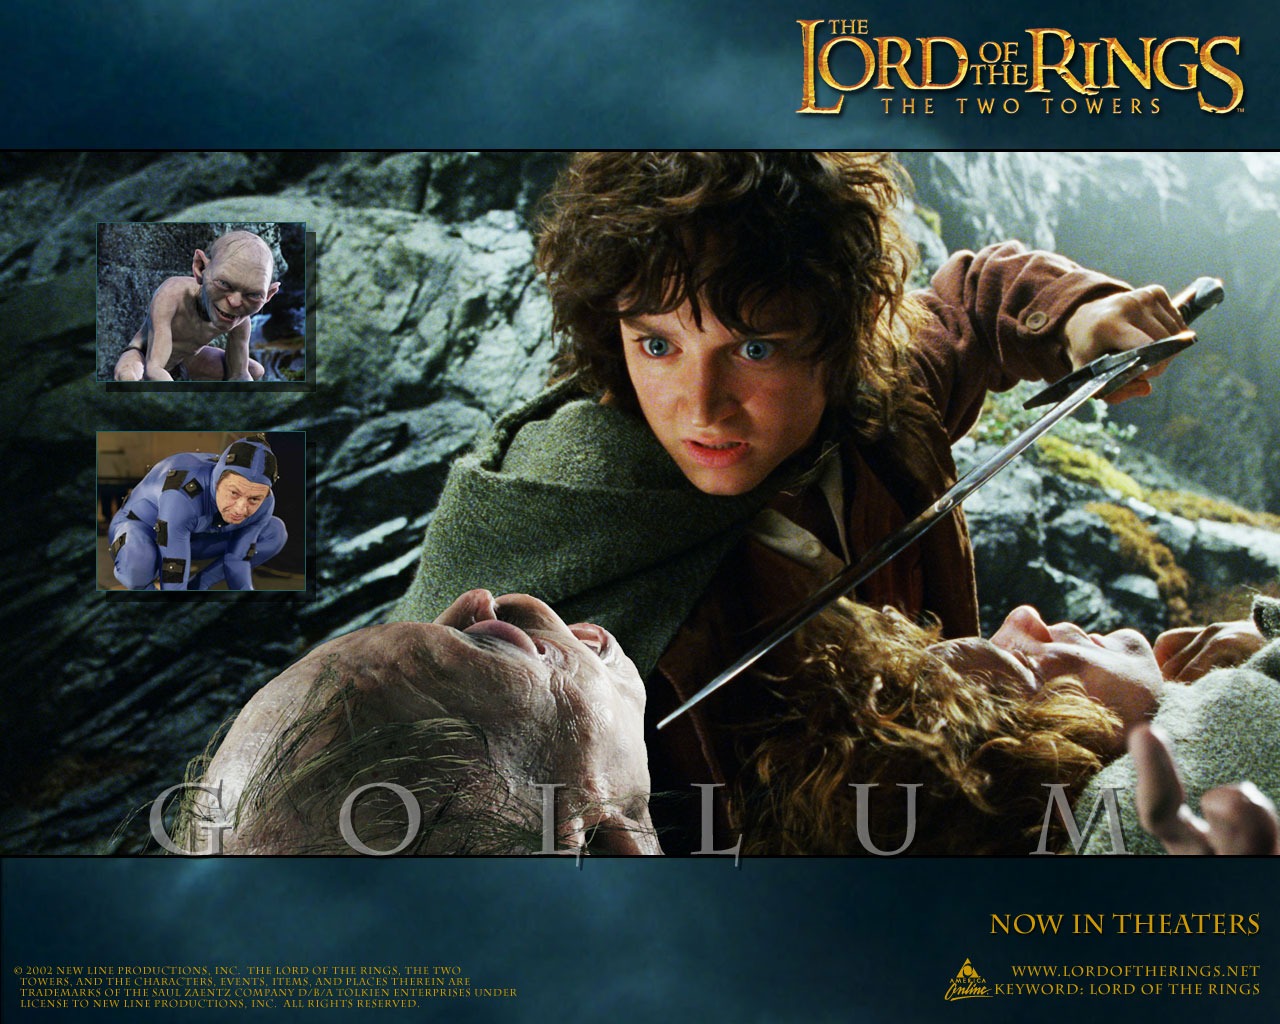 The Lord of the Rings wallpaper #8 - 1280x1024